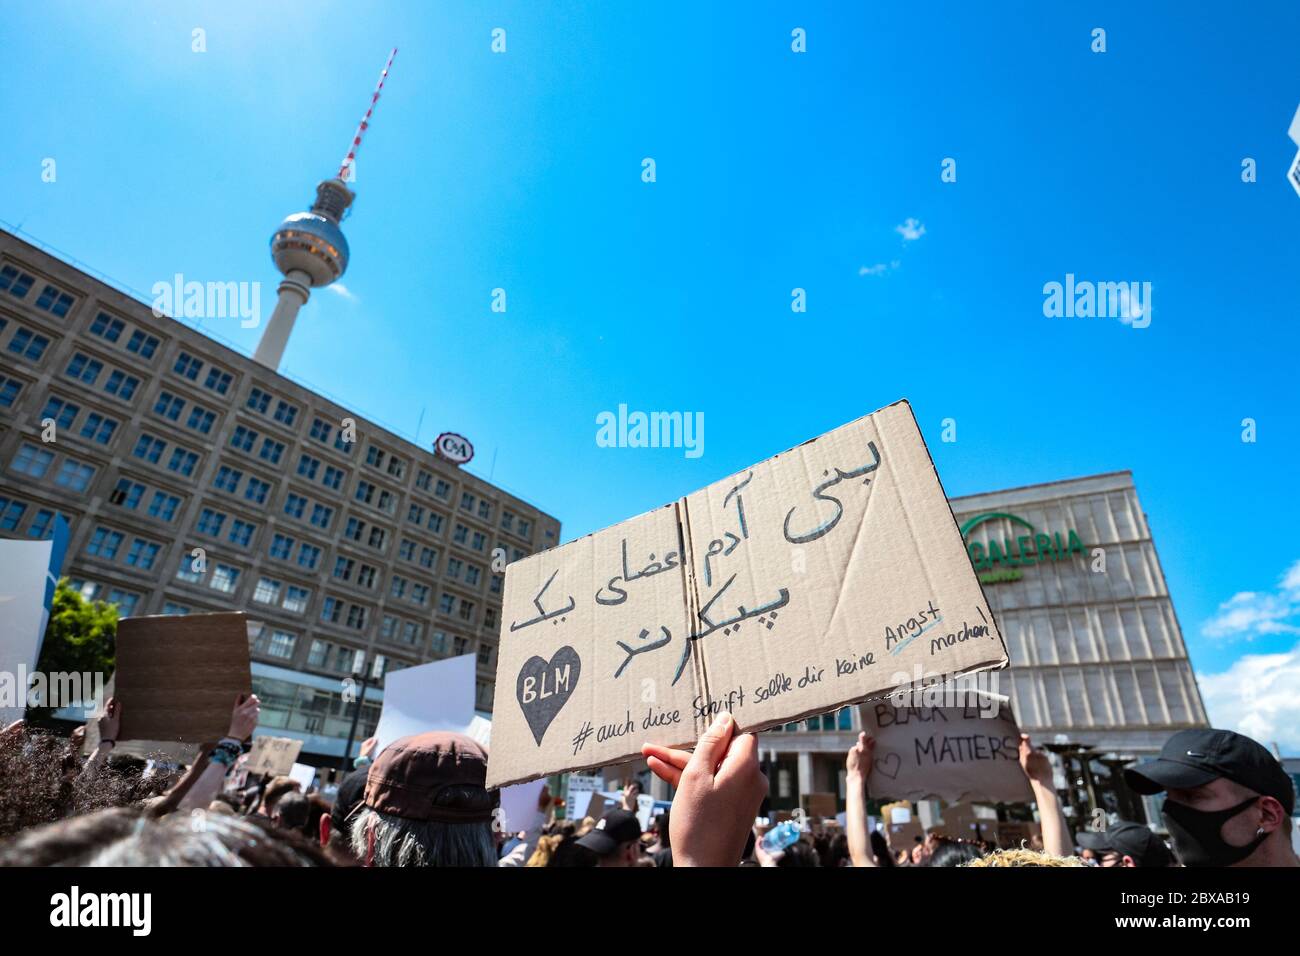 Sign in Arabic script and 'auch diese Schrift sollte dir keine Angst machen' (german: this script shouldn't scare you either) at a BLM protest. Stock Photo